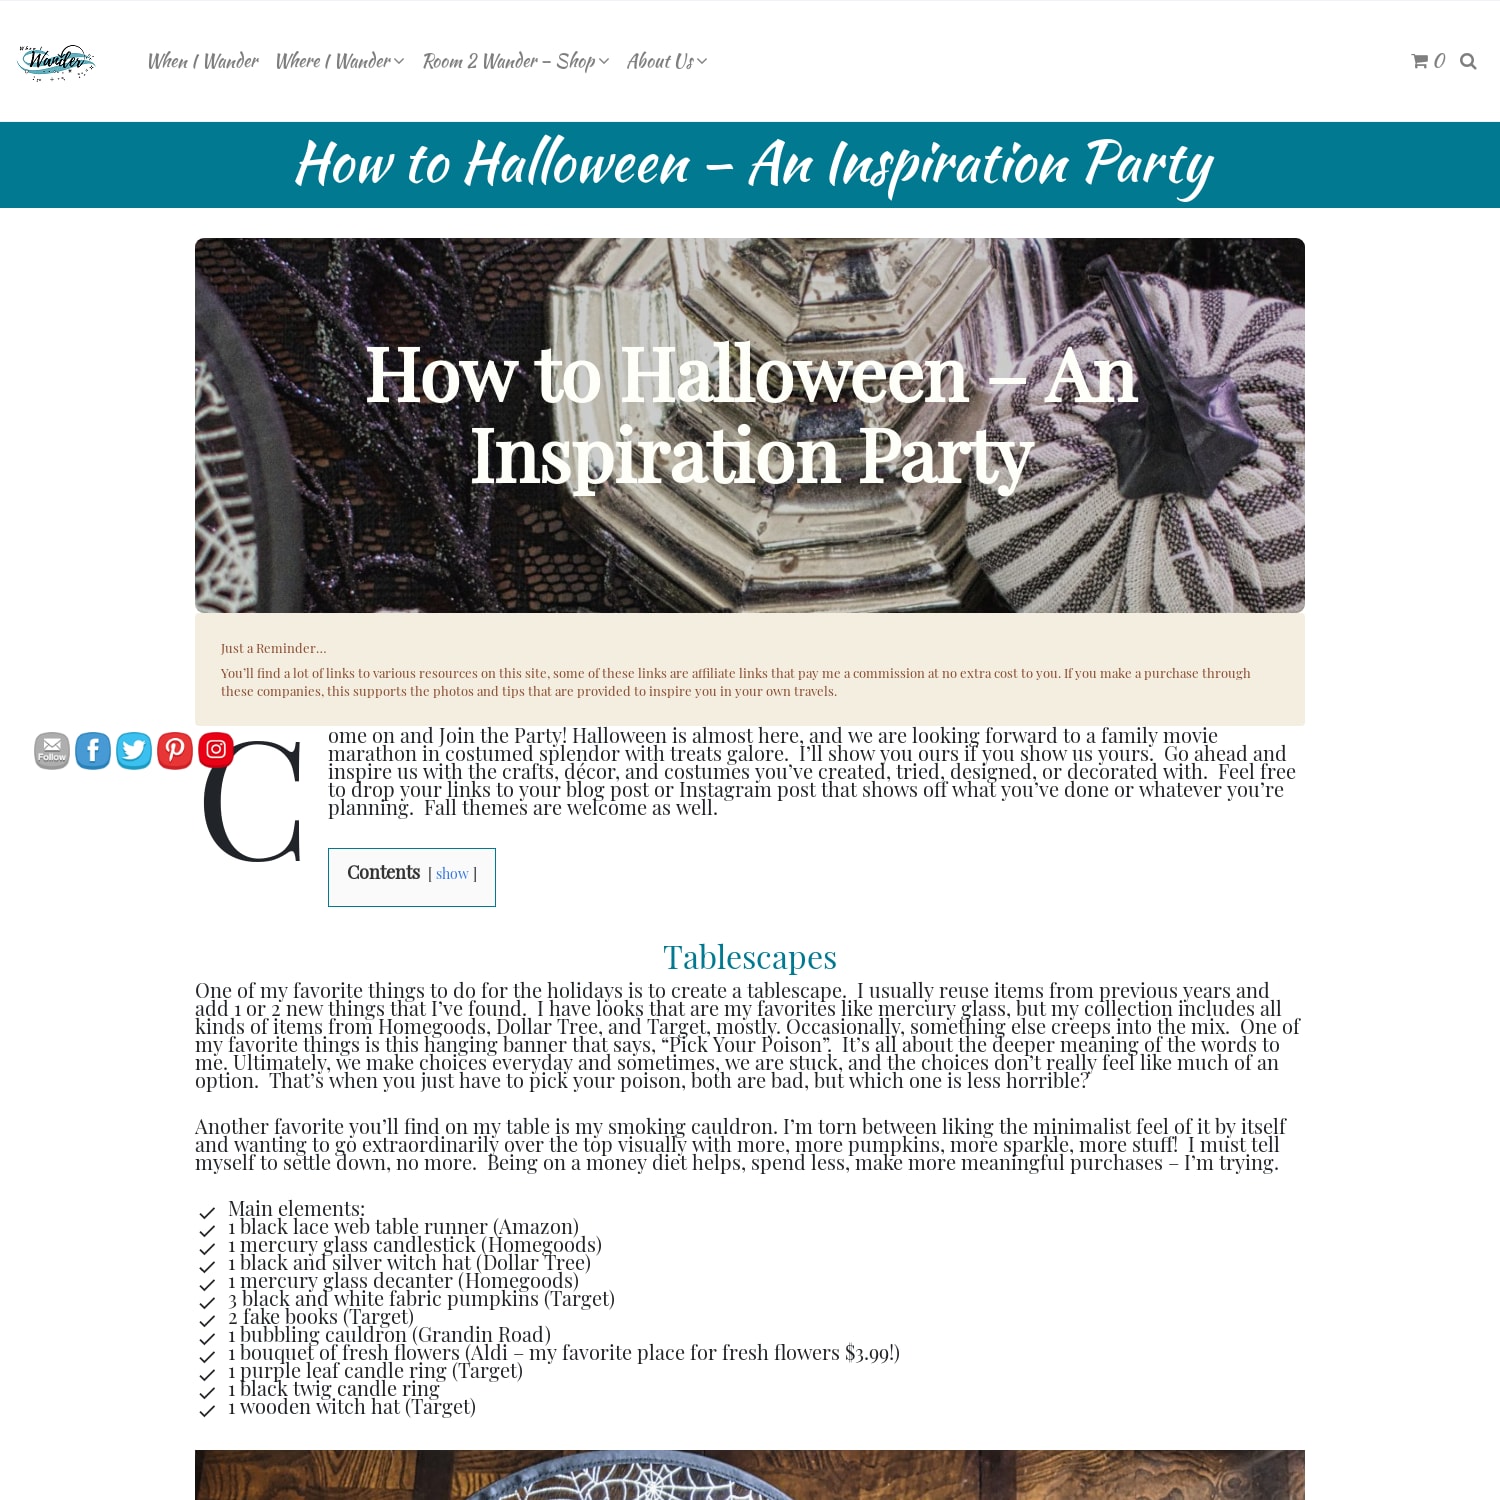 How to Halloween - An Inspiration Party